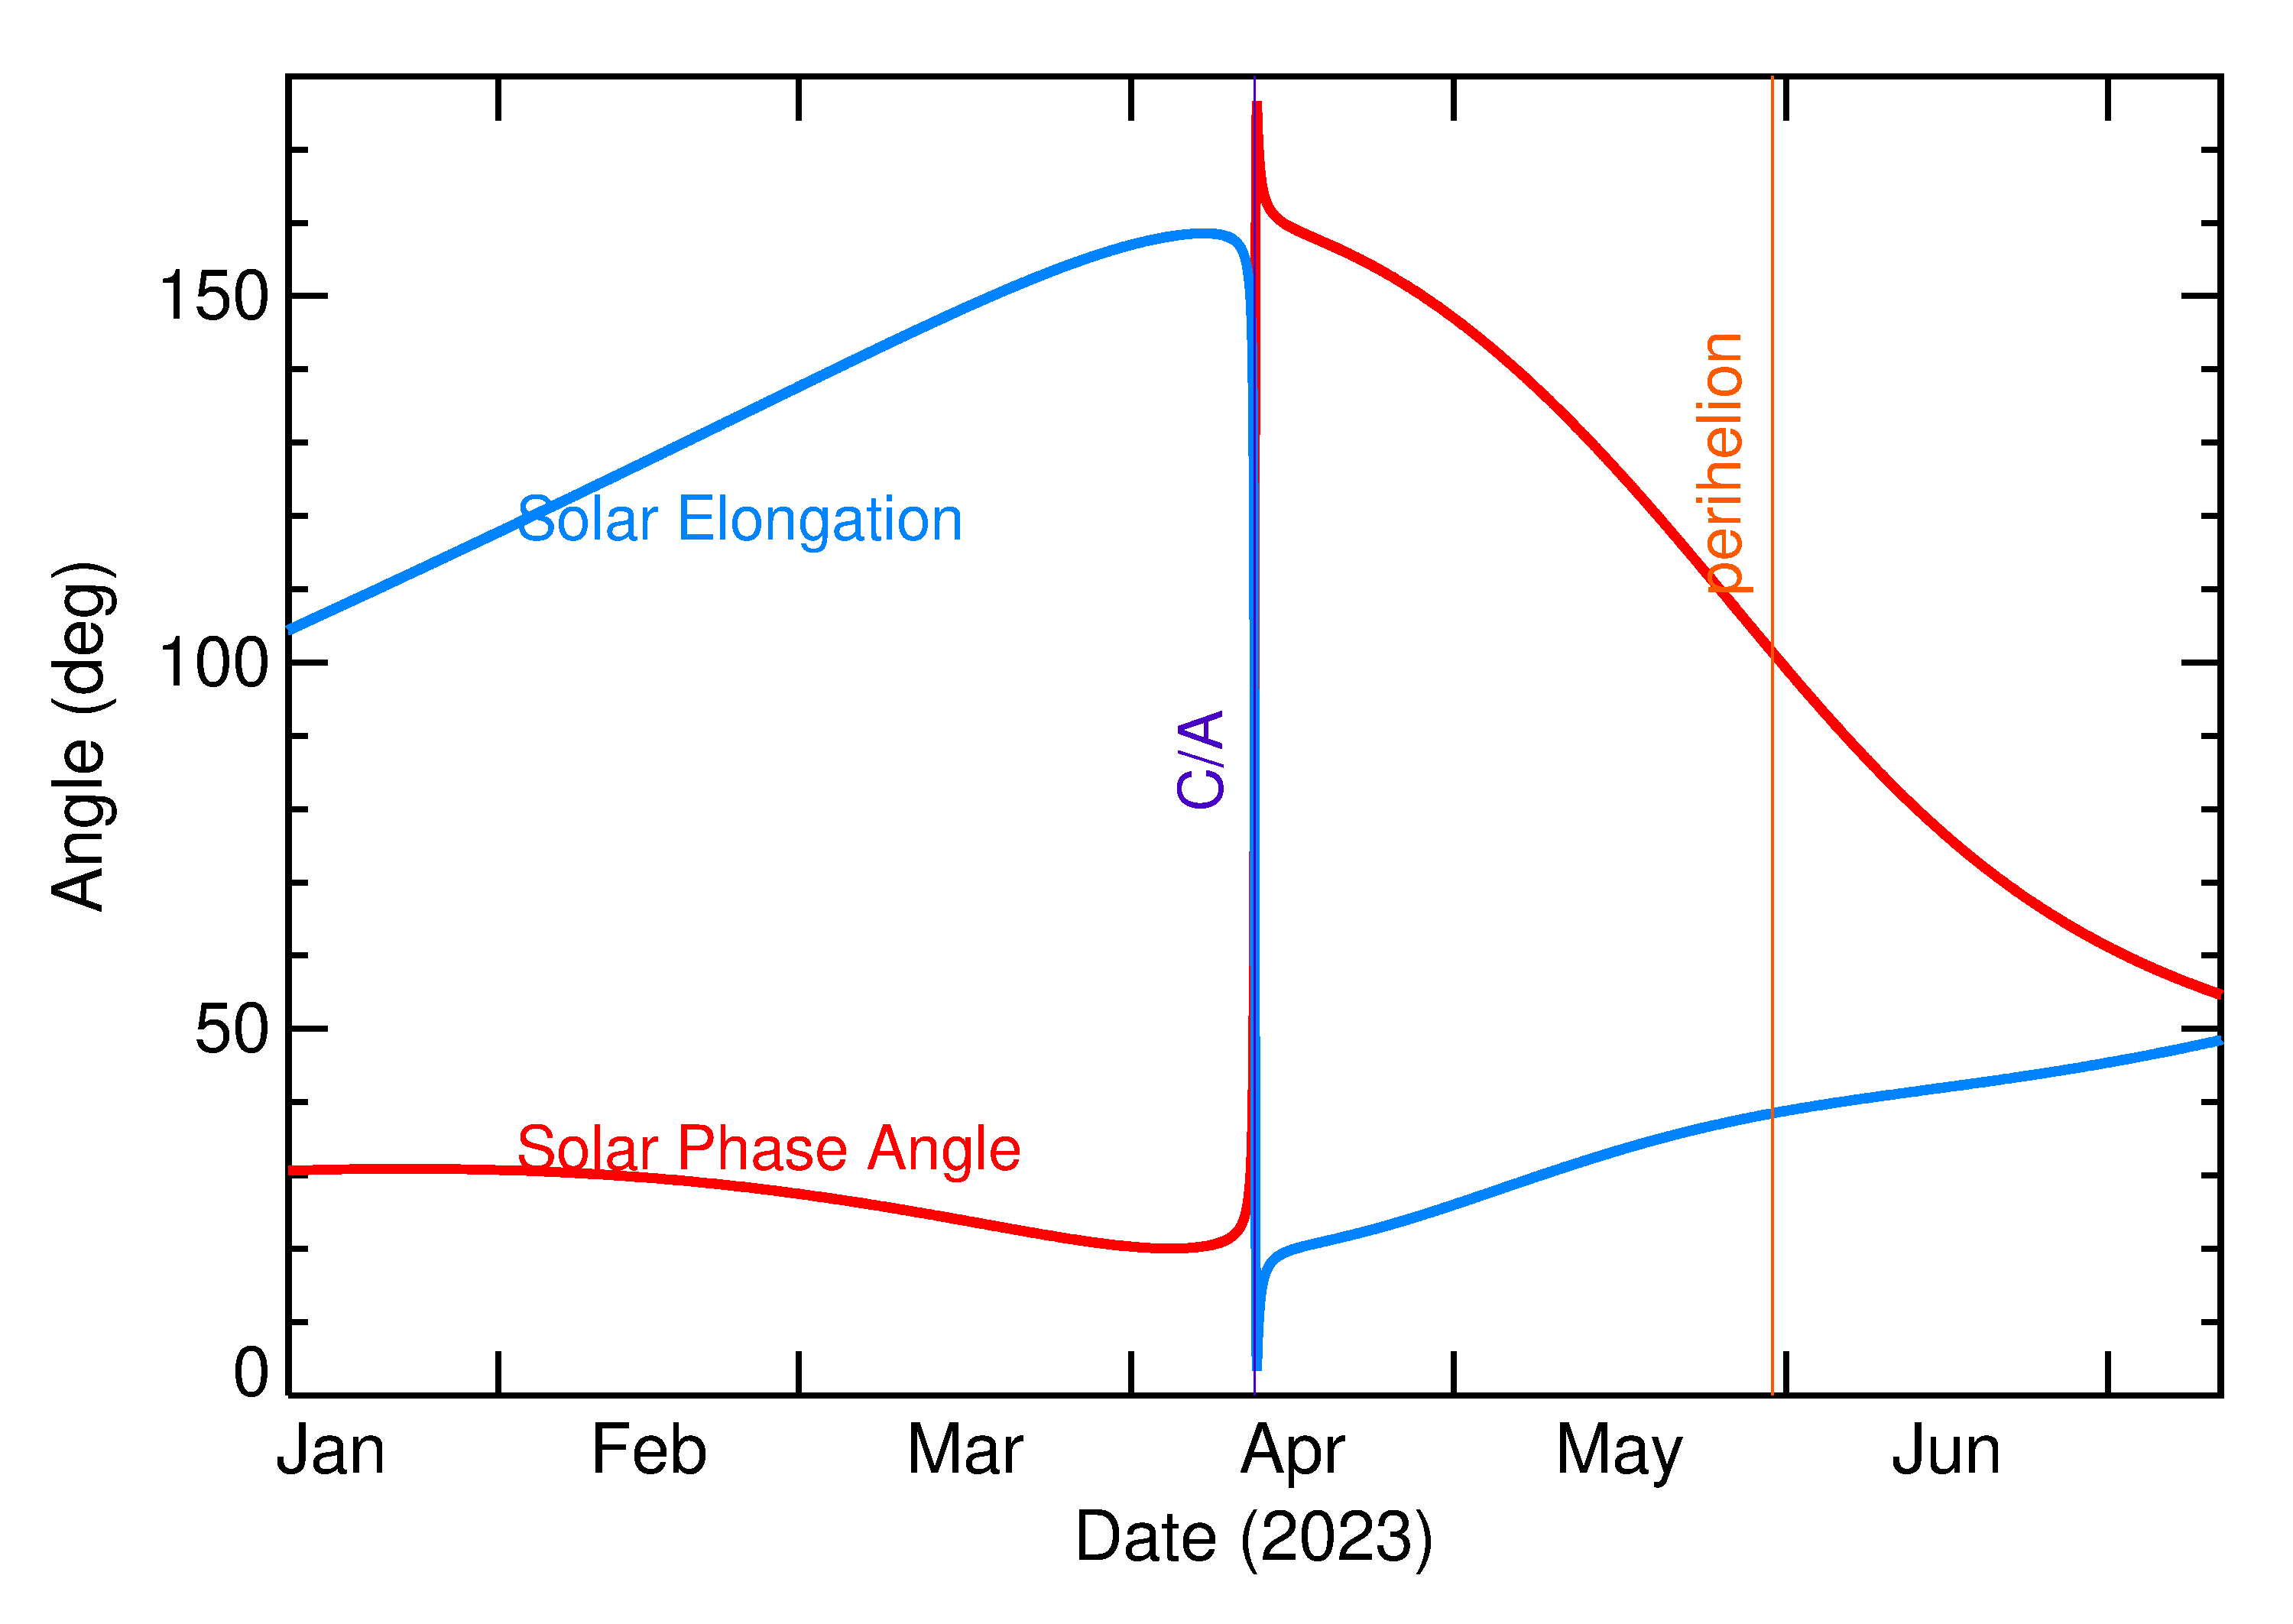 Solar Elongation and Solar Phase Angle of 2023 GQ in the months around closest approach